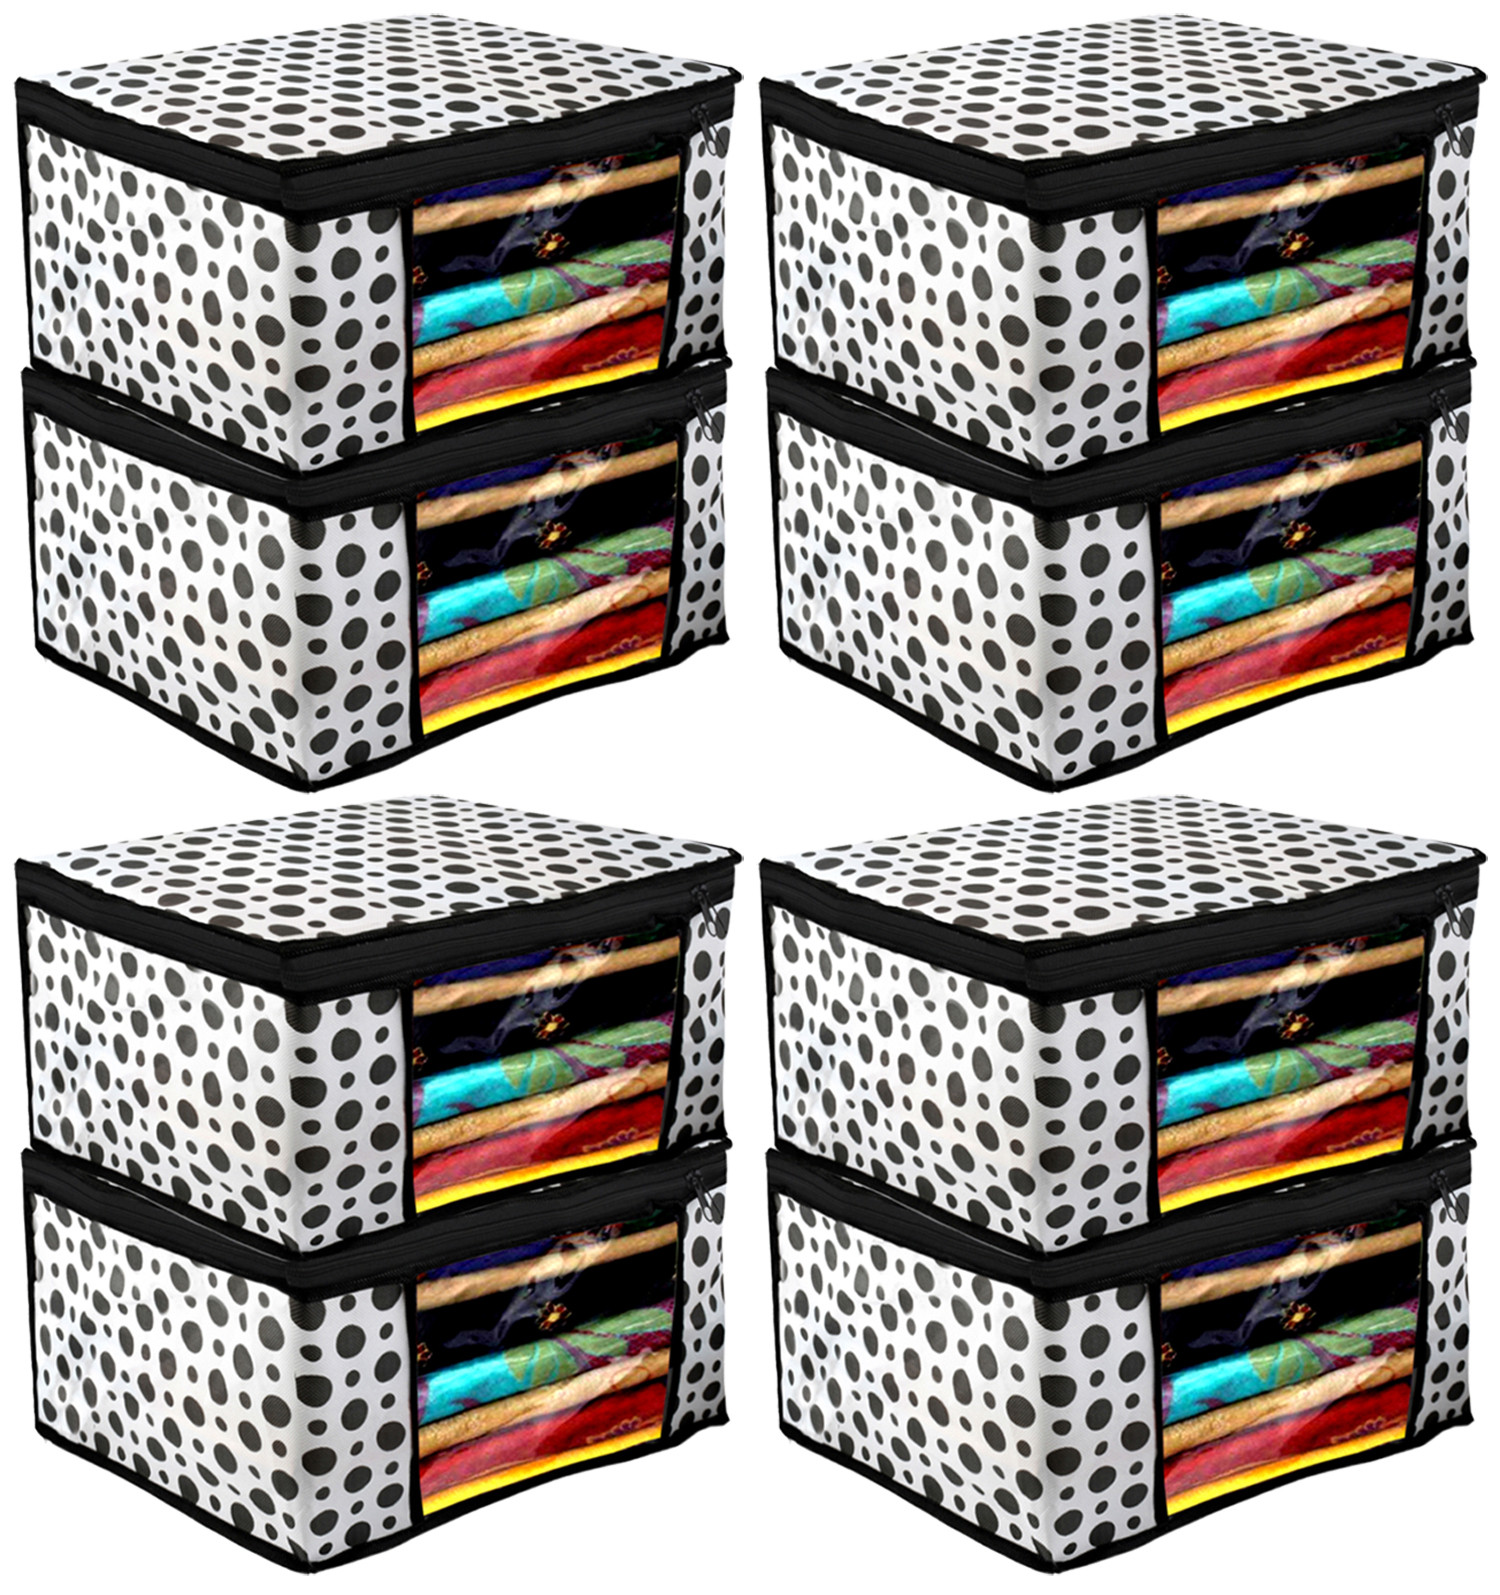 Kuber Industries Polka Dots Design Non Woven Fabric Saree Cover/ Clothes Organiser For Wardrobe Set with Transparent Window, Extra Large,(Black & White) -CTKTC38093